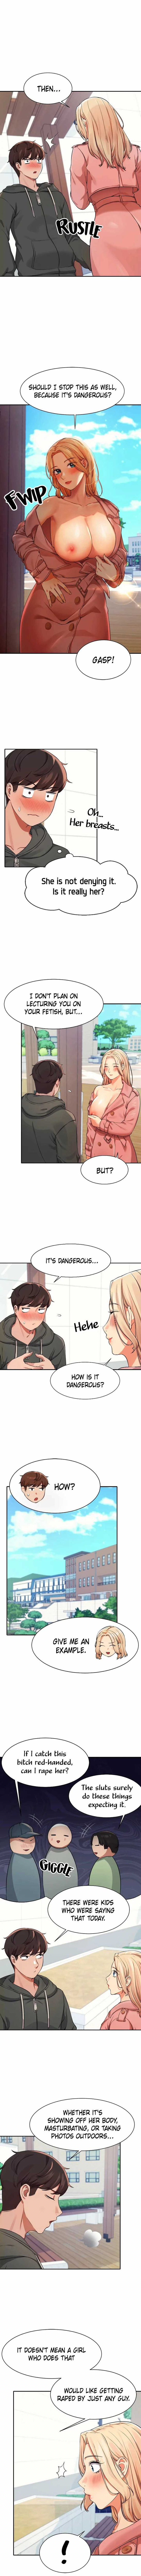 [OB, Overtime Sloth] Is There No Goddess in My College? Ch.15/? [English] [Manhwa PDF]